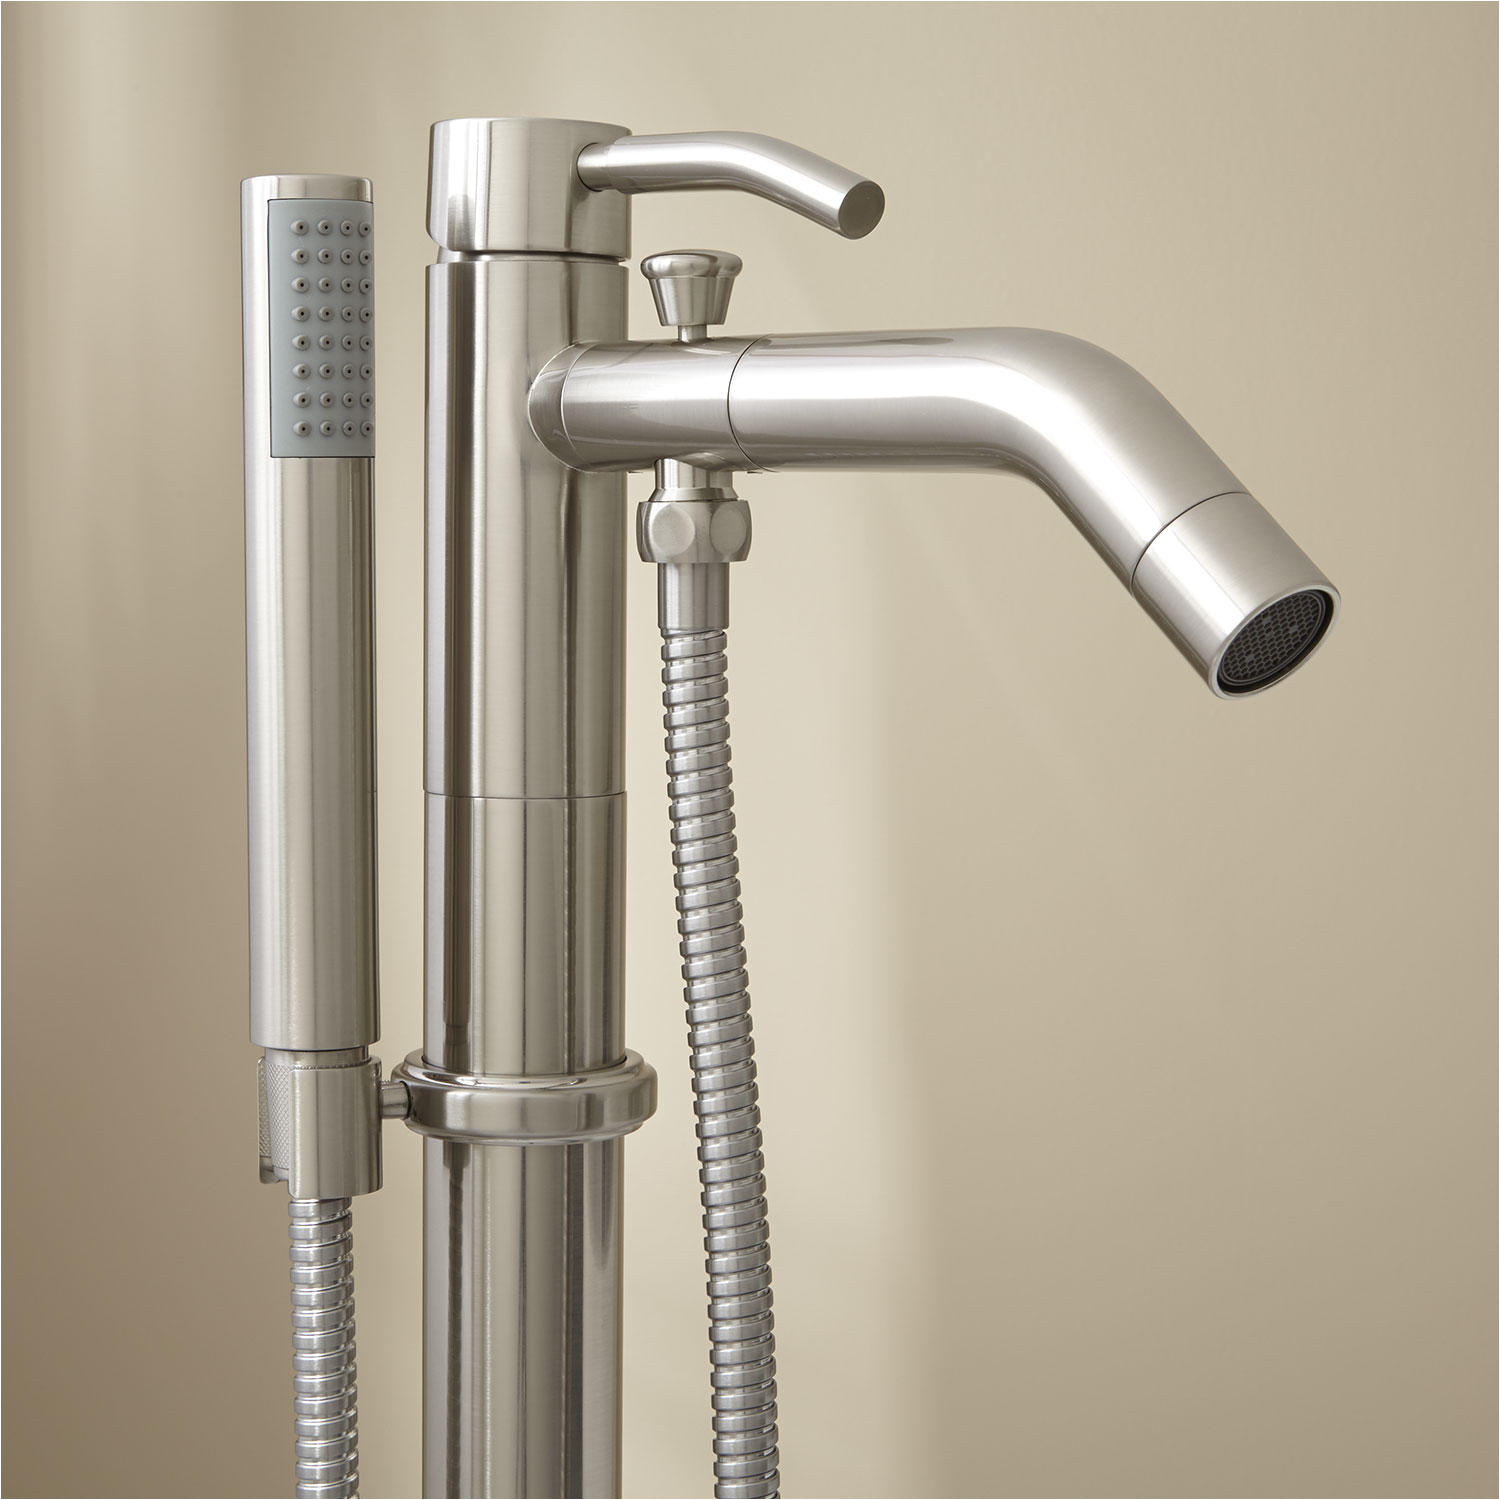 Faucet for Freestanding Bathtub Caol Freestanding Tub Faucet with Handshower